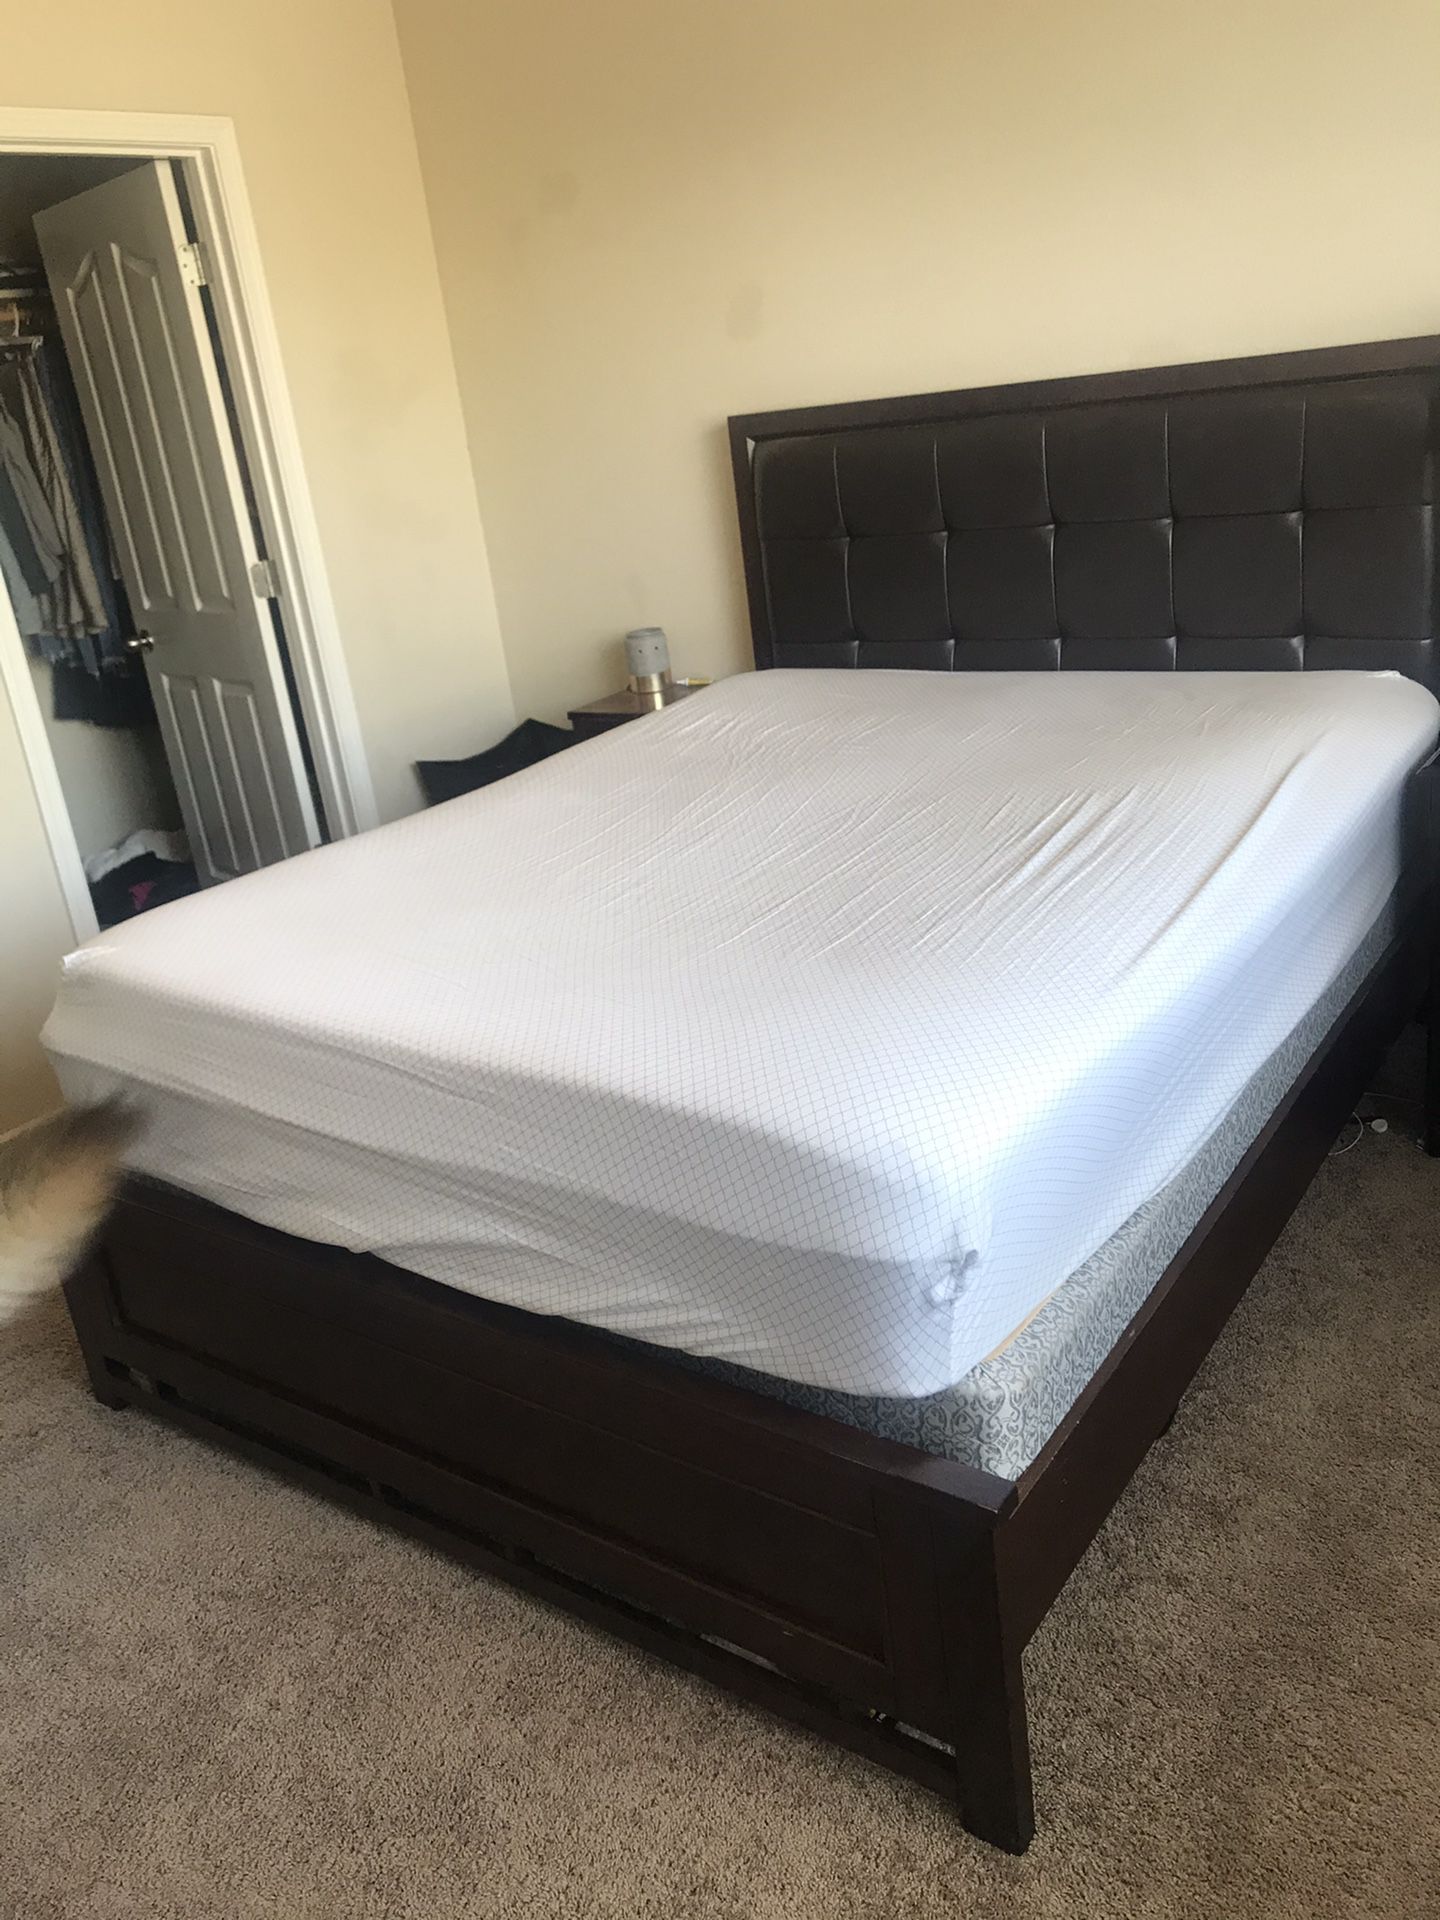 Queen size bed frame, box spring & mattress for sale. Nightstand also available